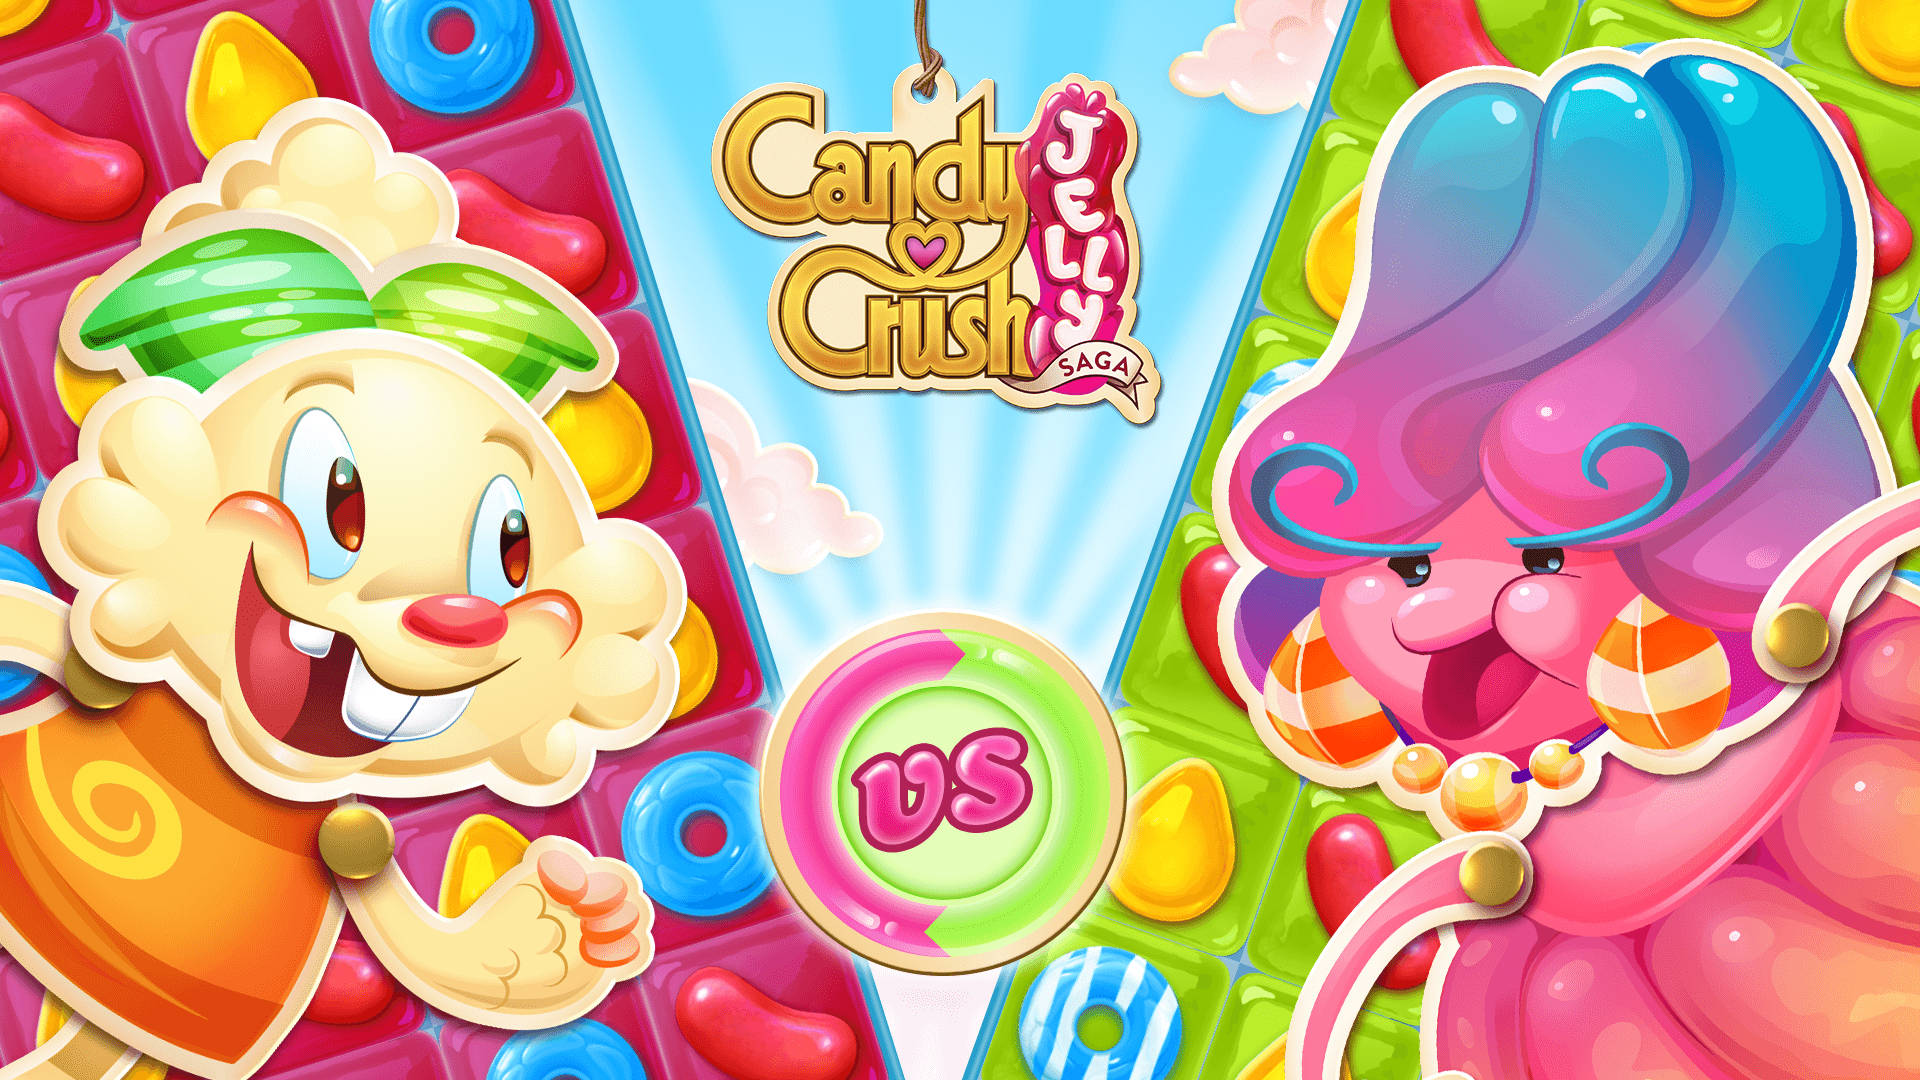 Jenny Versus Jelly Queen In The Candy Crush Saga Wallpaper